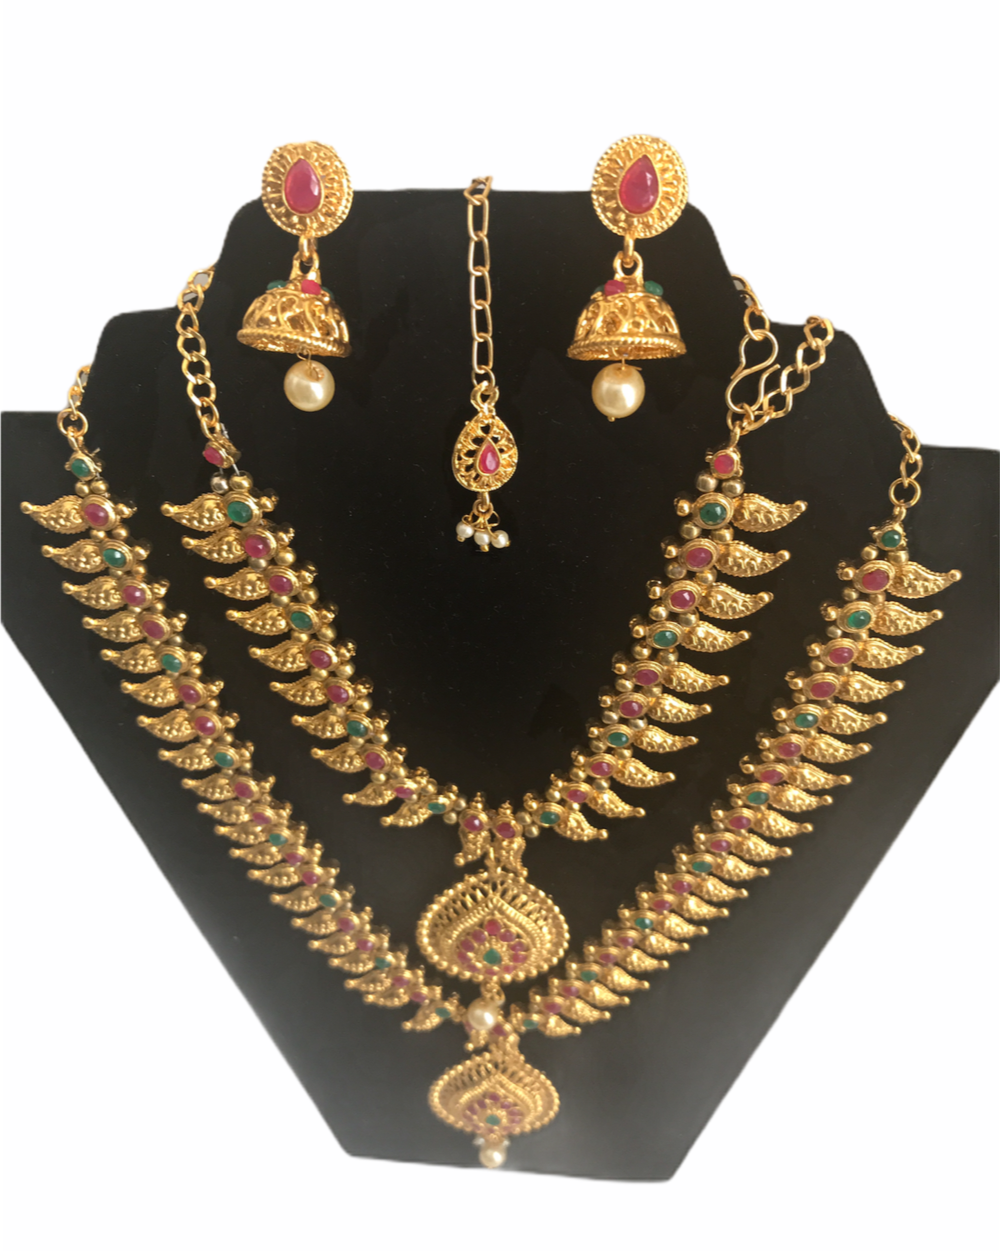 Necklace combo and earrings set Indian jewelry 4 pieces with teeka